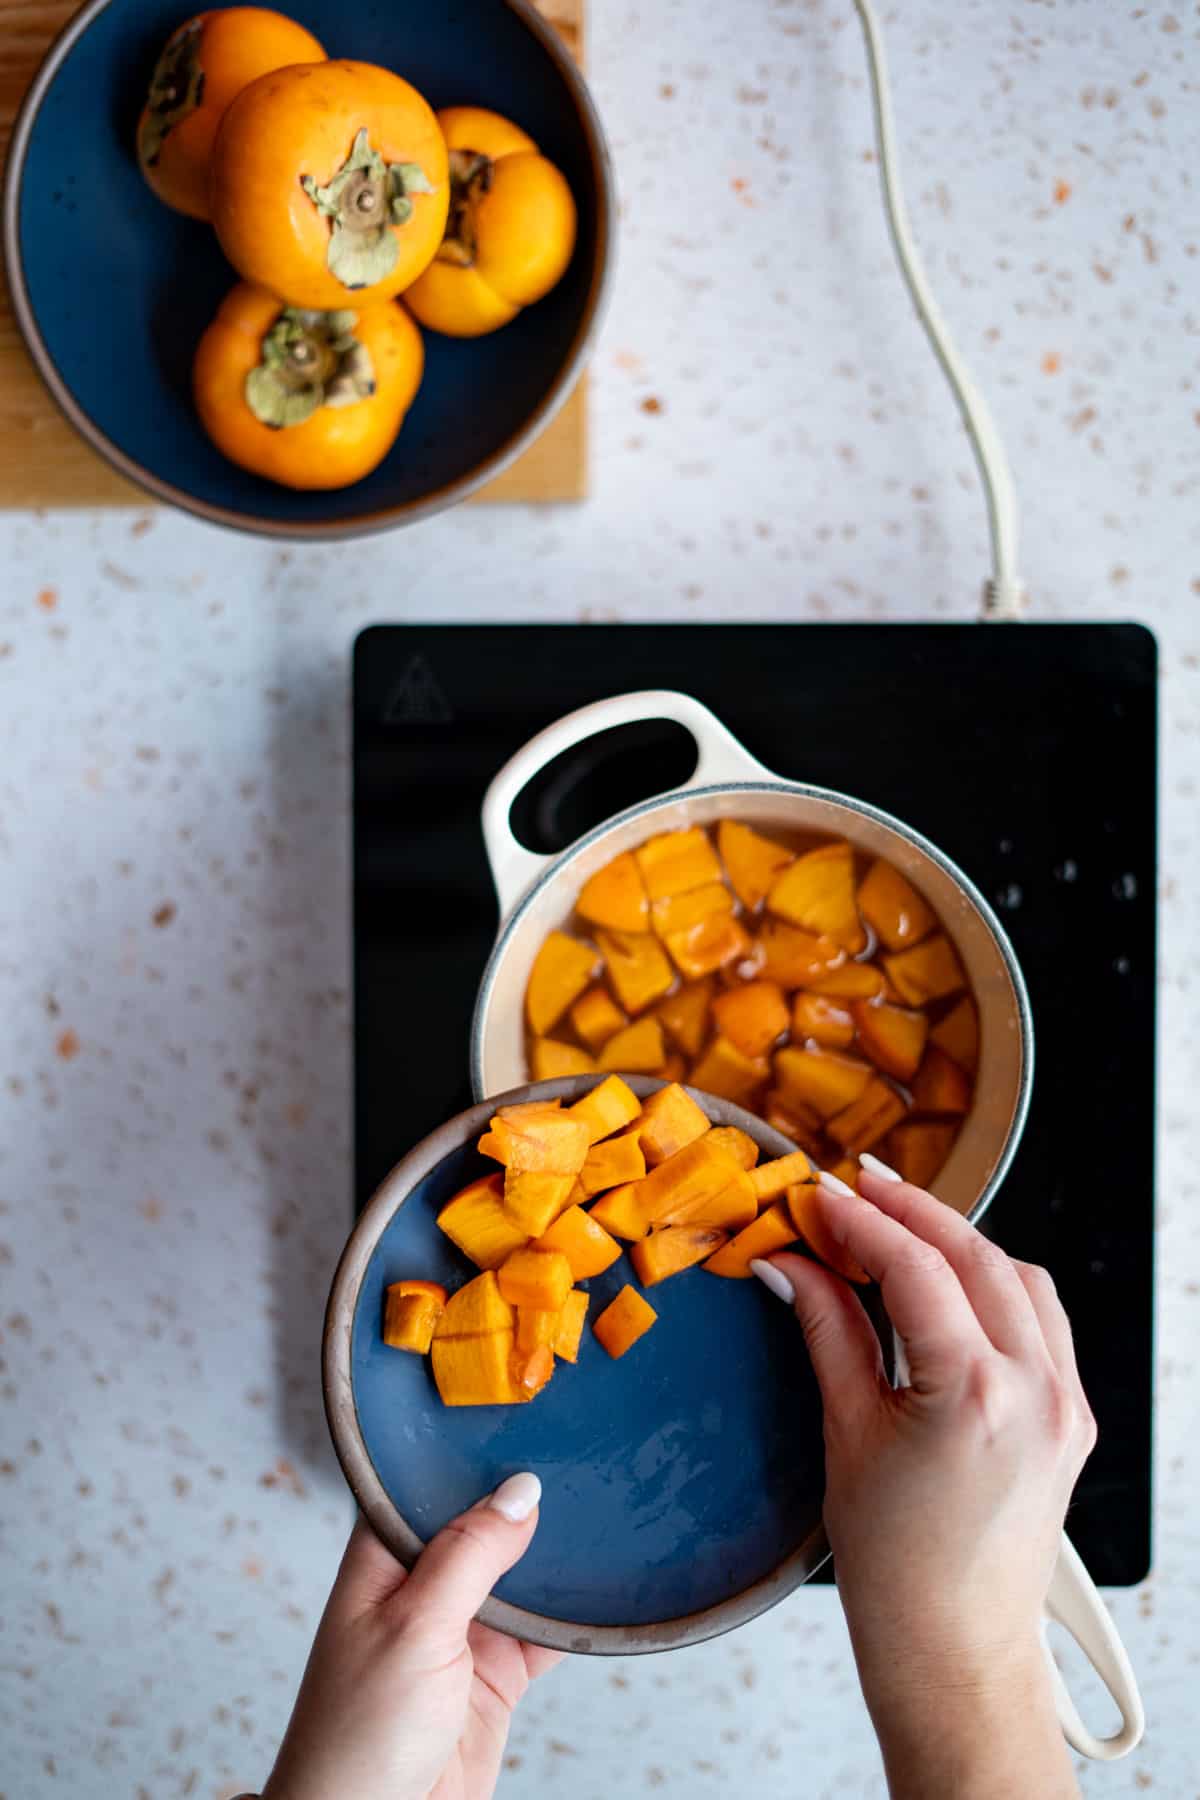 Hands from out of frame are putting cut persimmons into a saucepan of simple syrup.